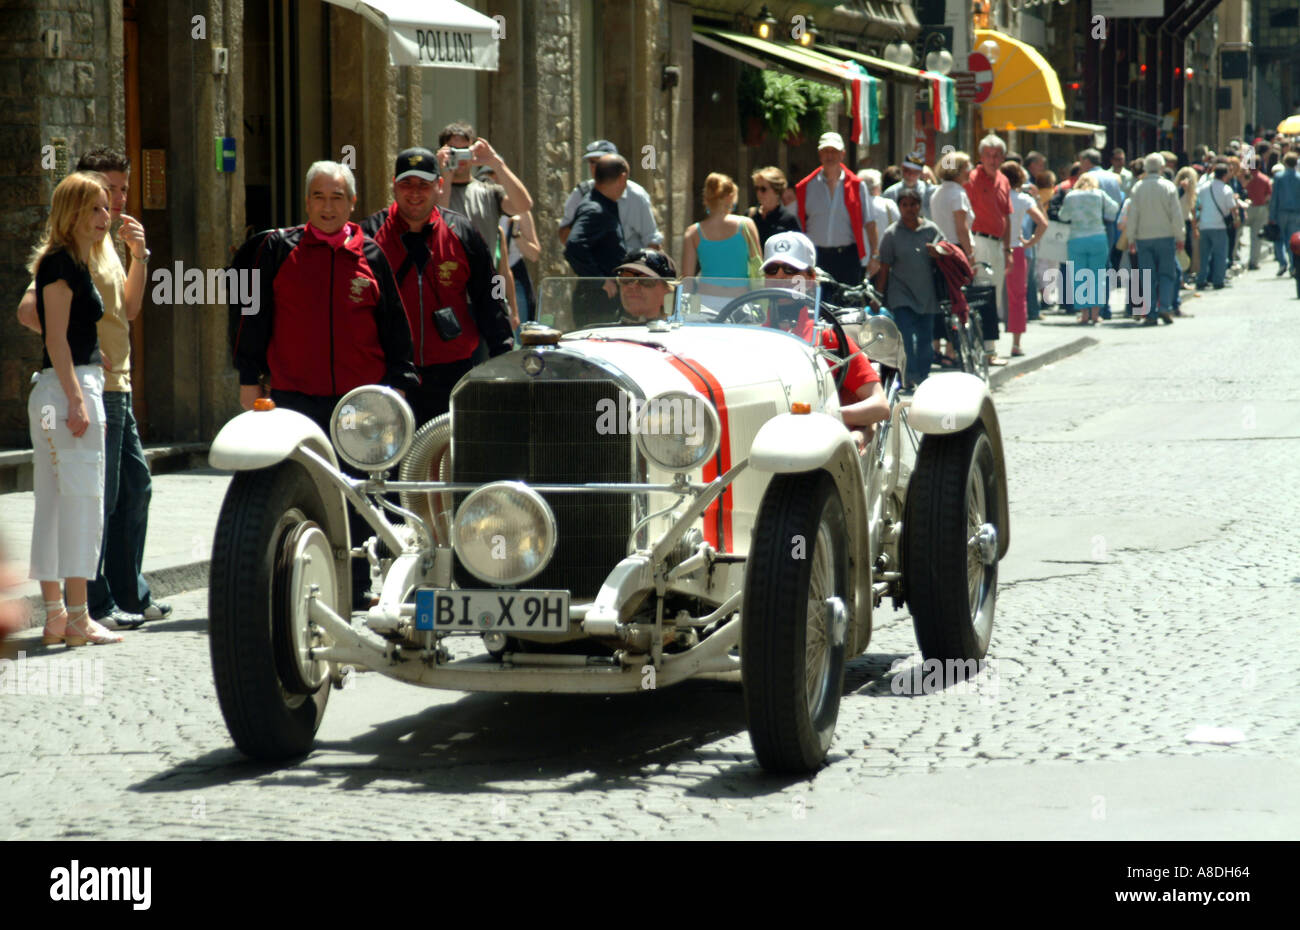 The Mille Miglia 2005 race passing through Florence Tuscany Italy EU German Mercedes Stock Photo